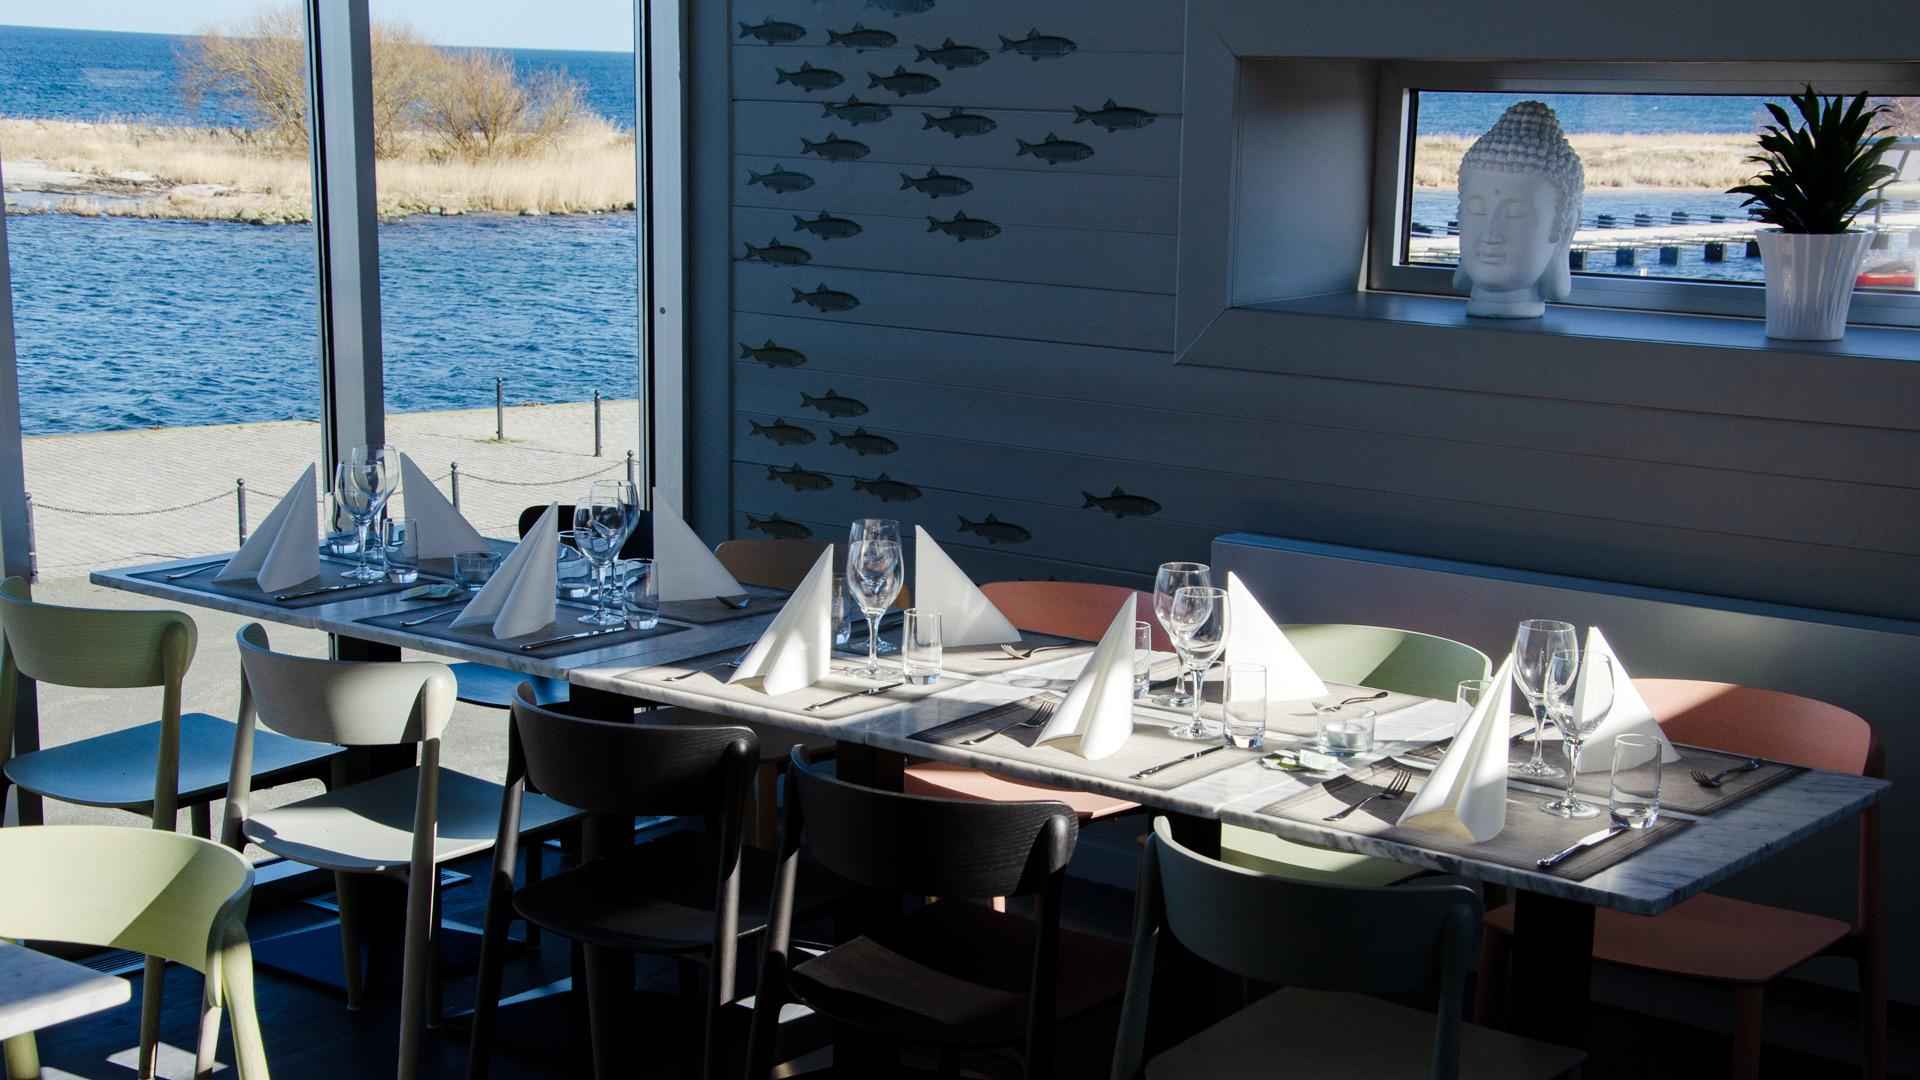 A set table at Buhres restaurant in Kivik harbour. A shoal of fish is painted on the wall, and the blue water is just outside the windows.